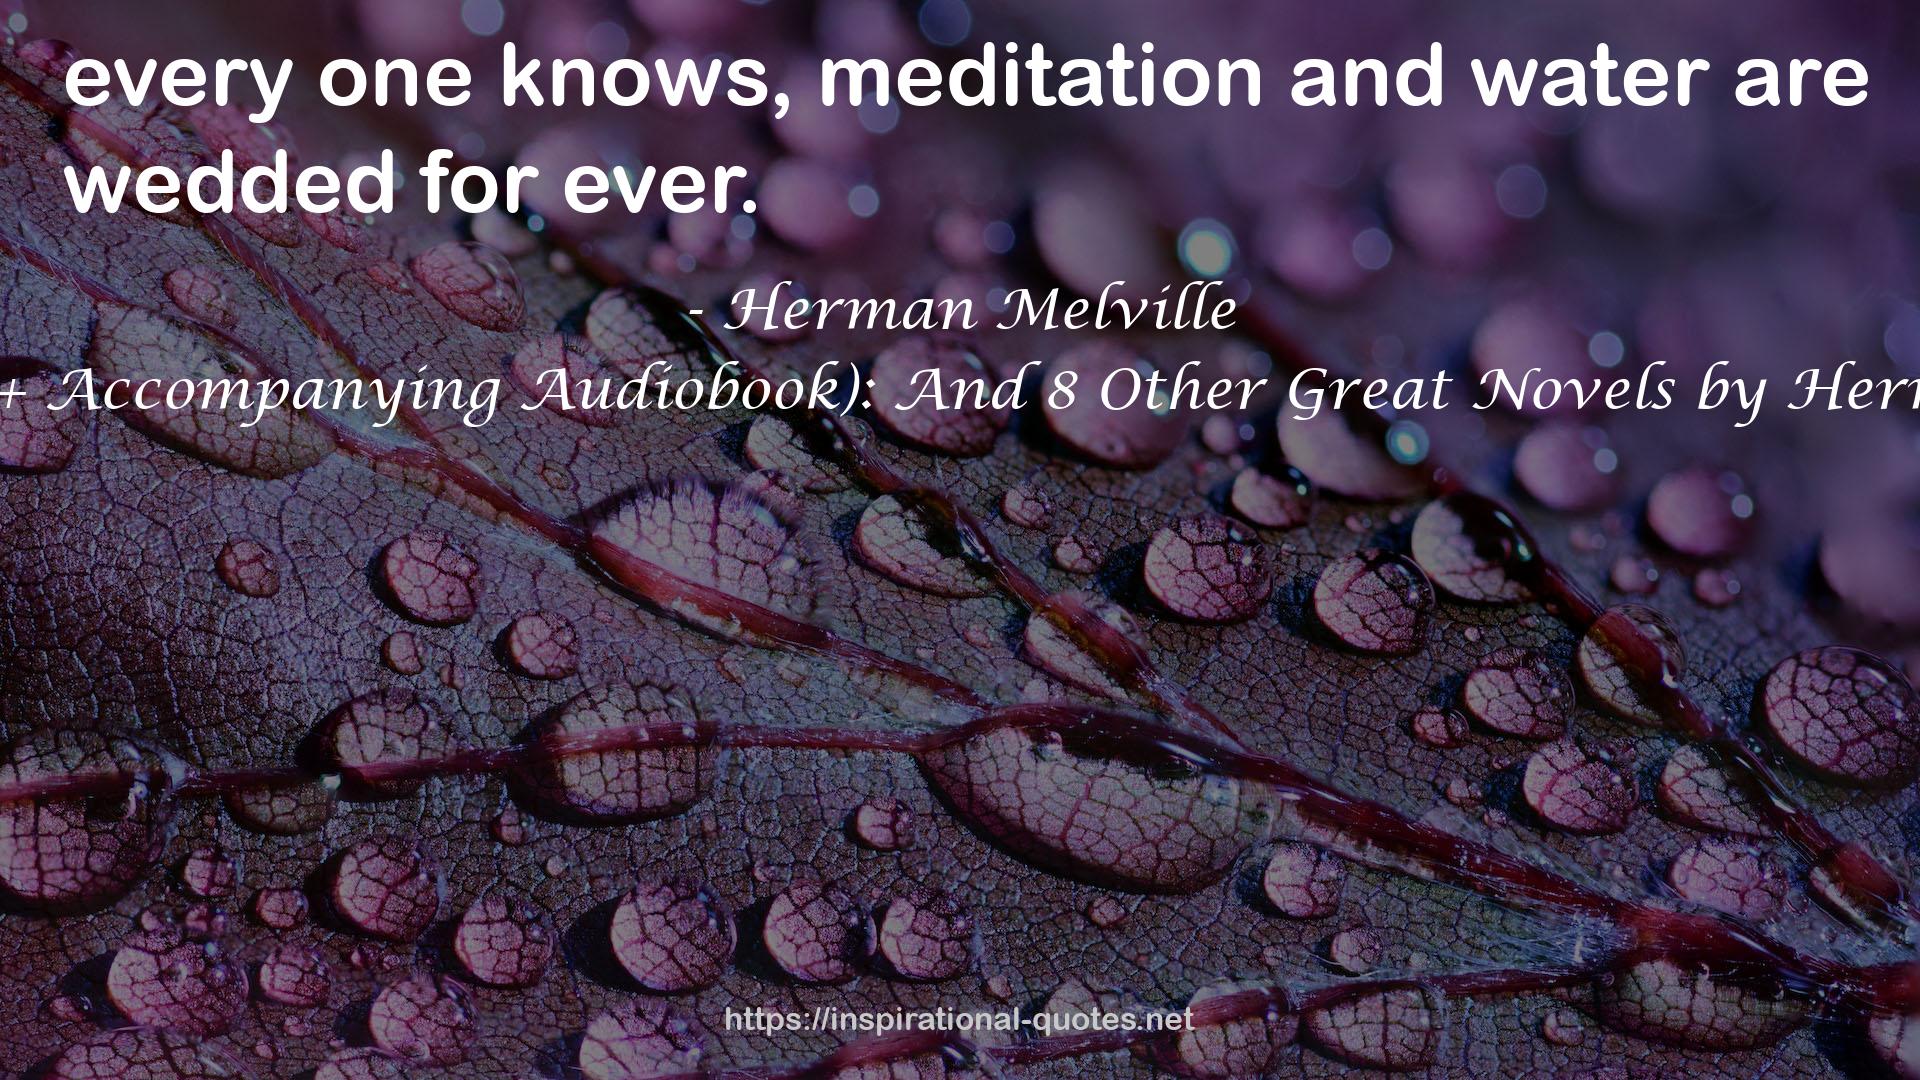 Moby Dick (+ Accompanying Audiobook): And 8 Other Great Novels by Herman Melville QUOTES